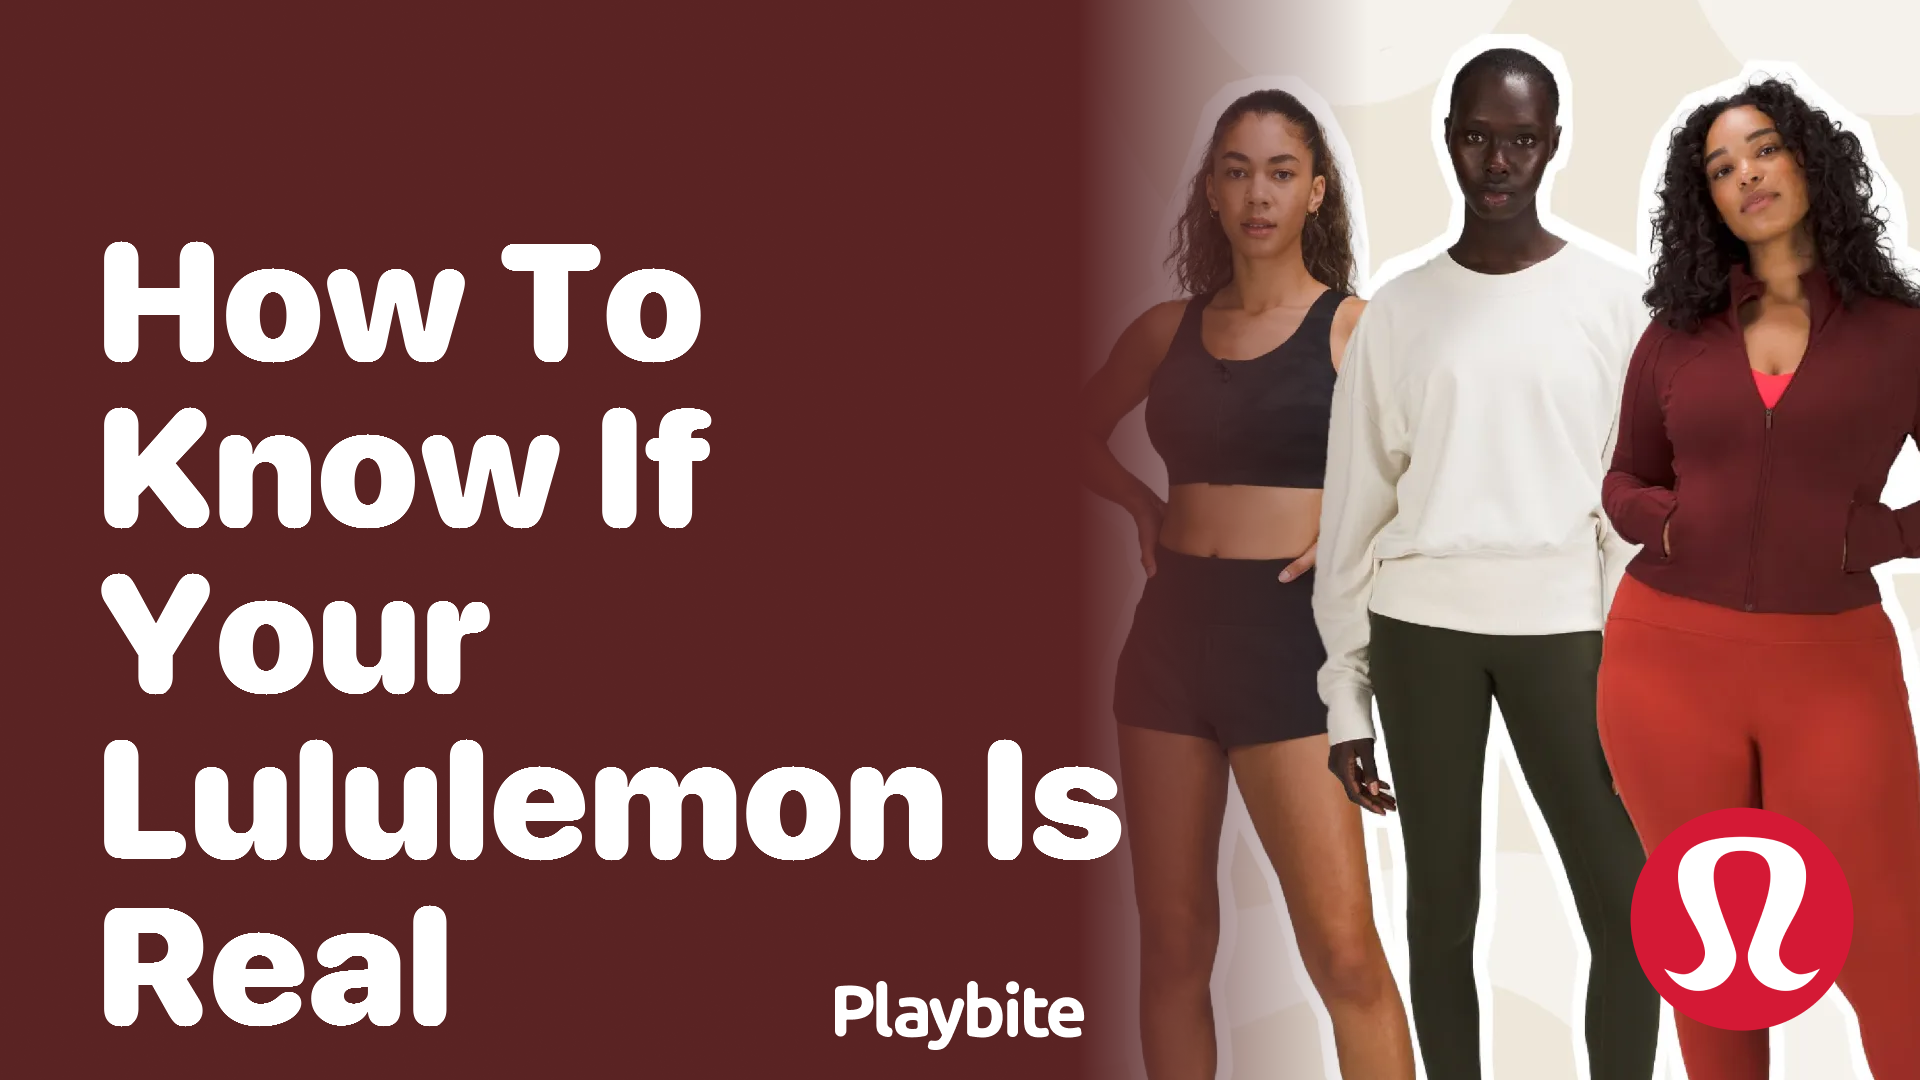 How to Know If Your Lululemon Is Real - Playbite